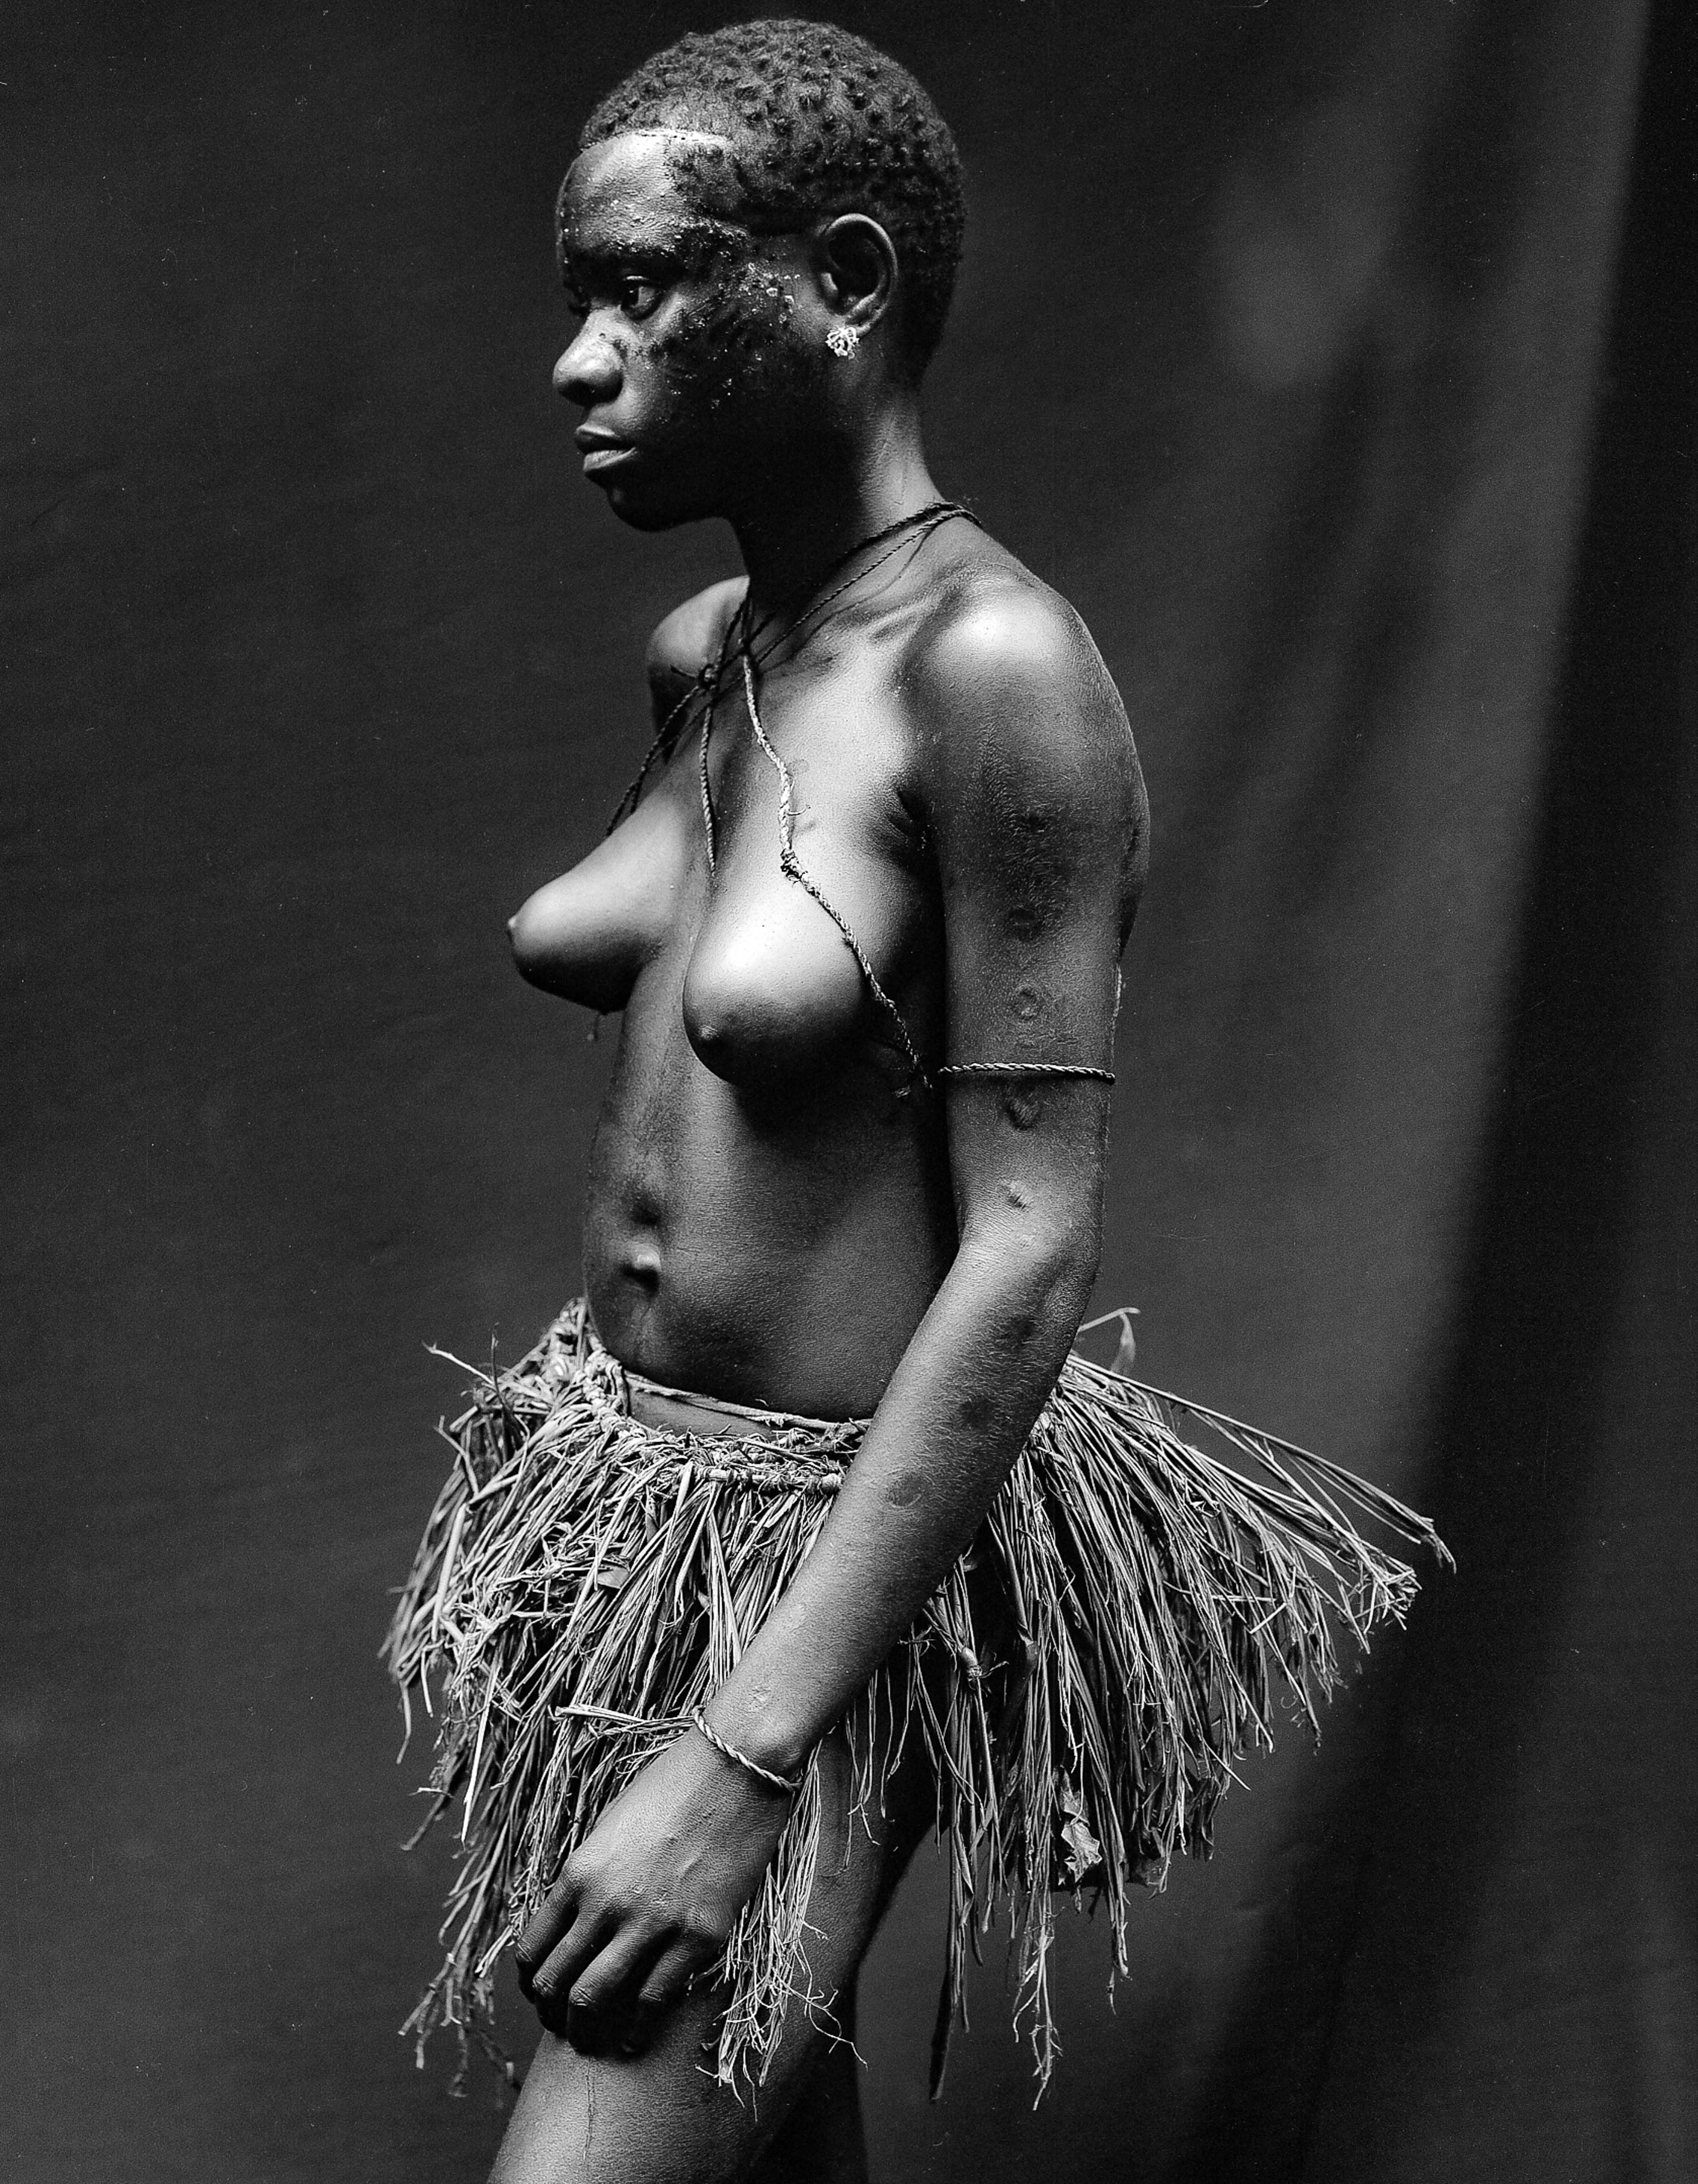 Central African Republic, Pygmy Girl In Grass Skirt, 2000